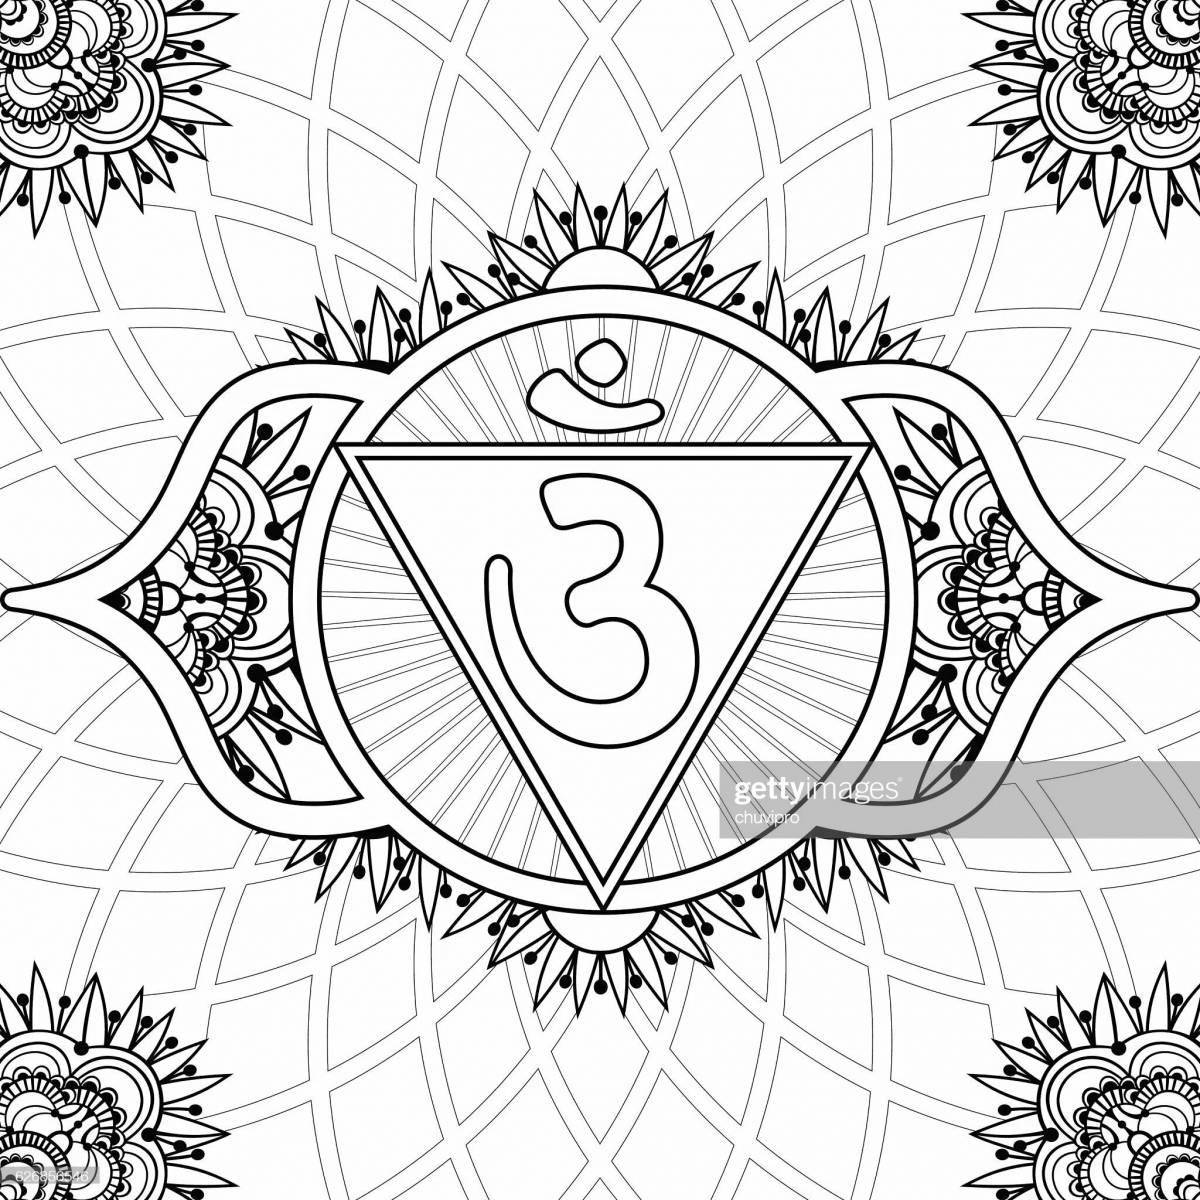 Vibrant chakra coloring pages